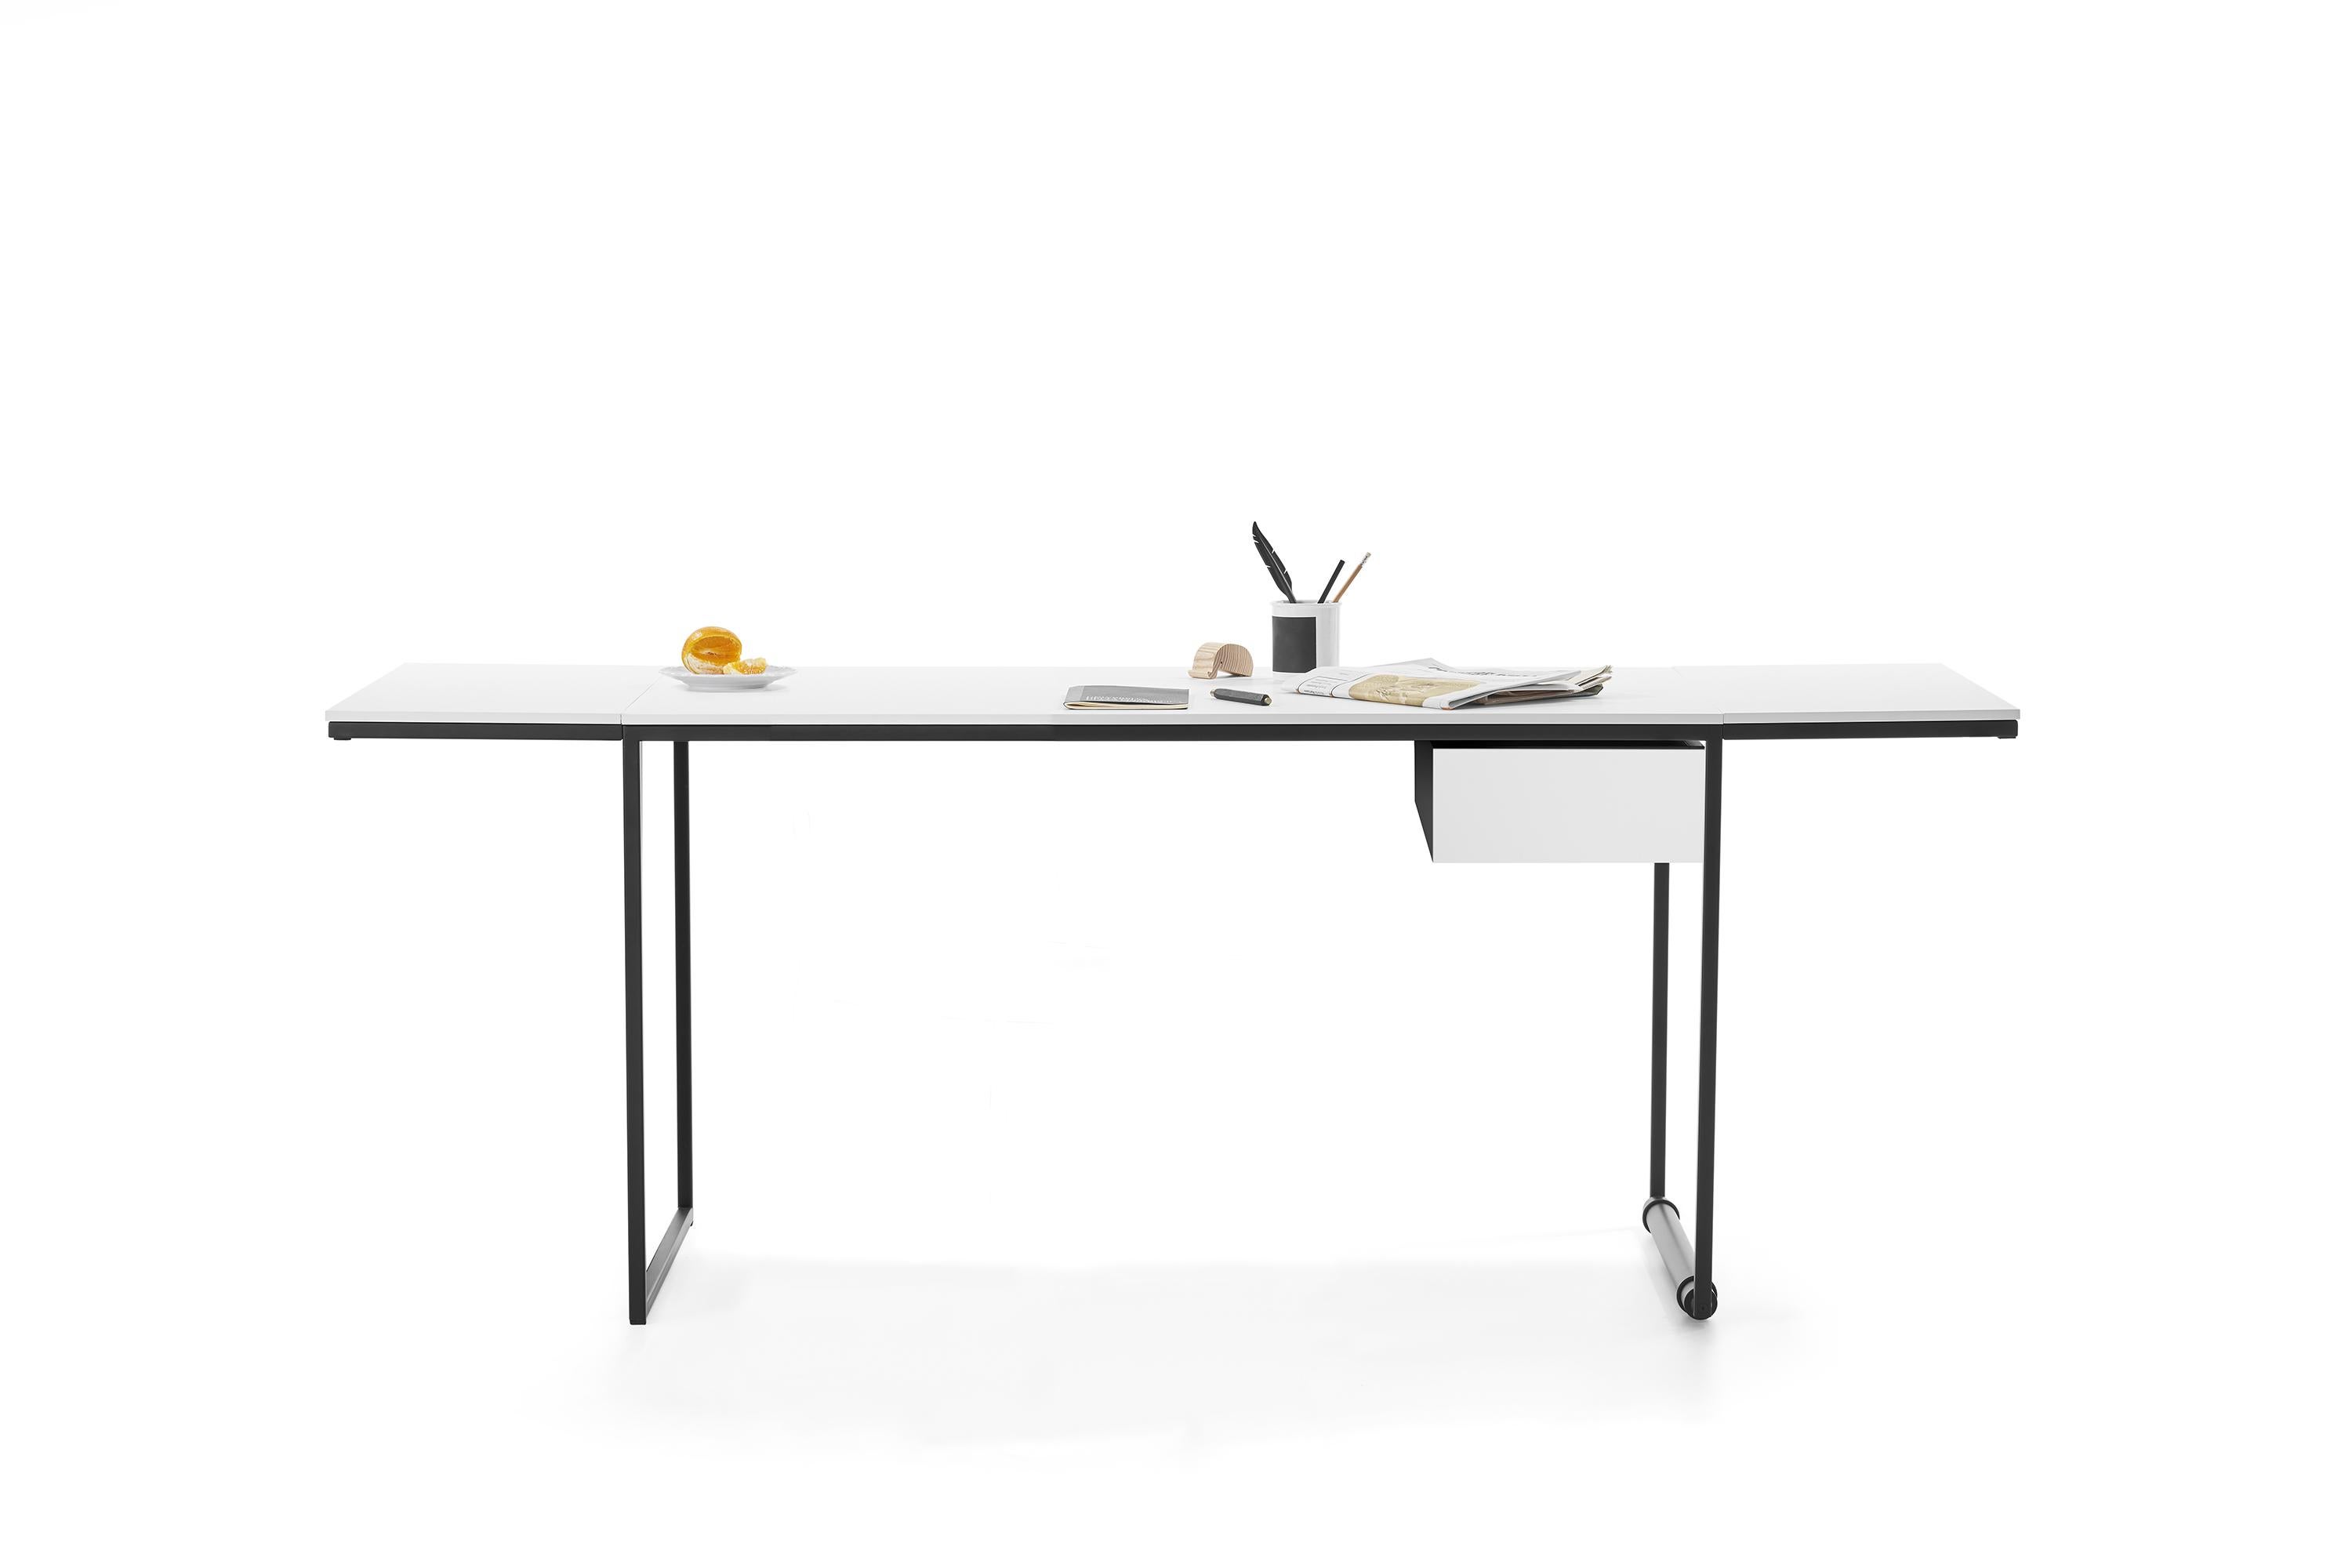 A table or a desk? Support surface, workstation, study desk, leisure space, a space for sharing: Macis is the unique and versatile solution for the multiple demands of daily living.

We live in a world of liquid, increasingly blurred borders.